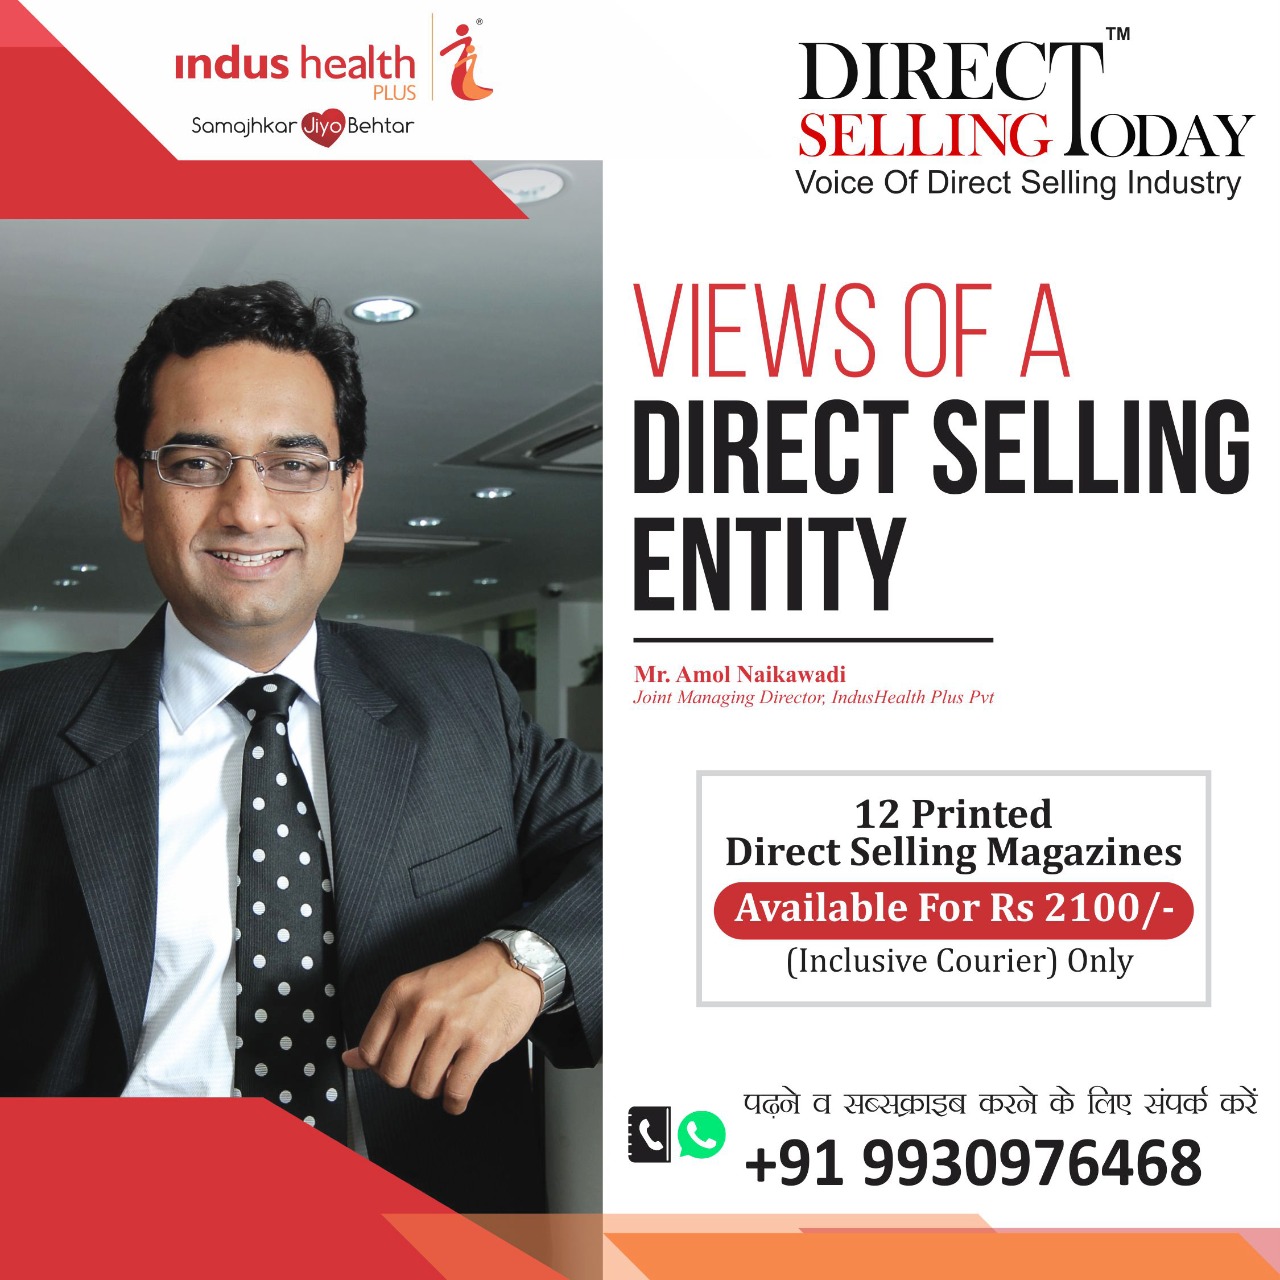 Views of a Direct Selling Entity